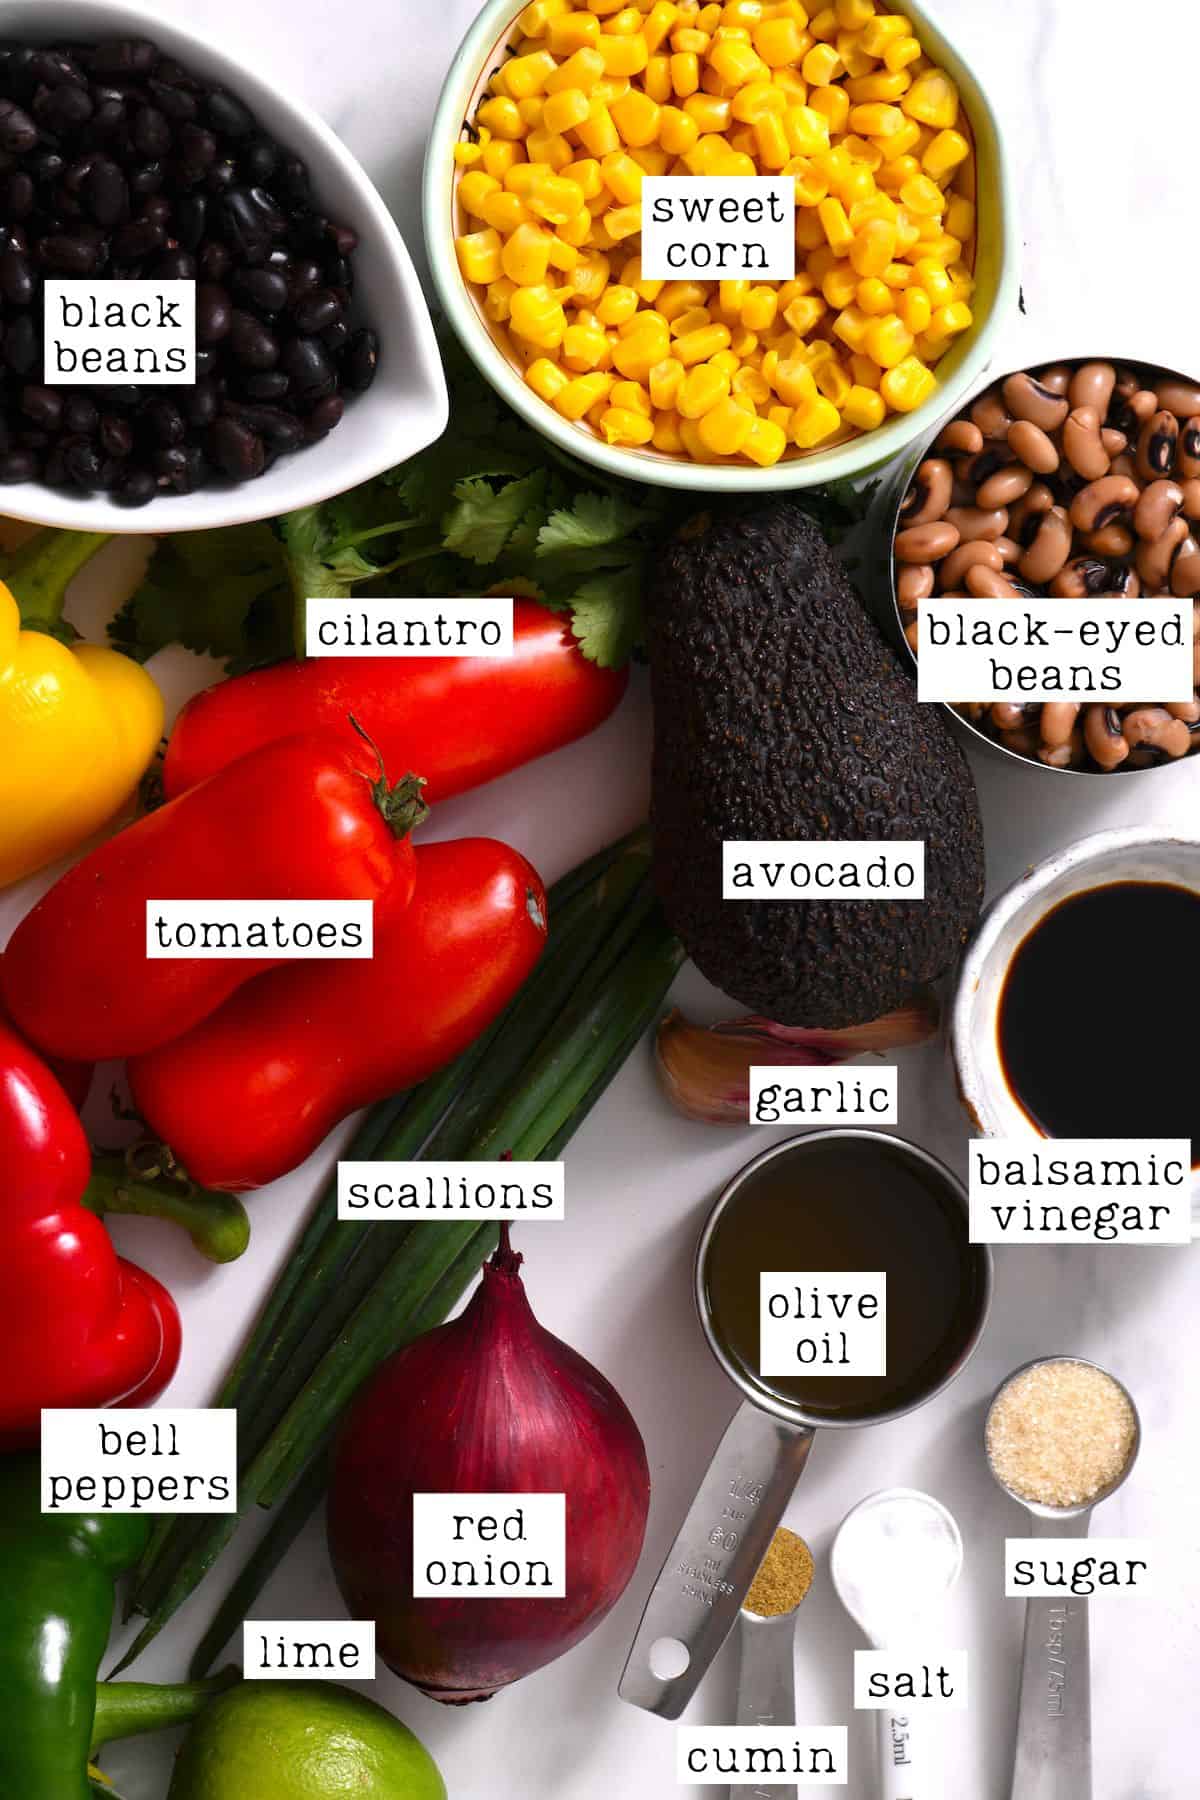 Ingredients for Texas caviar